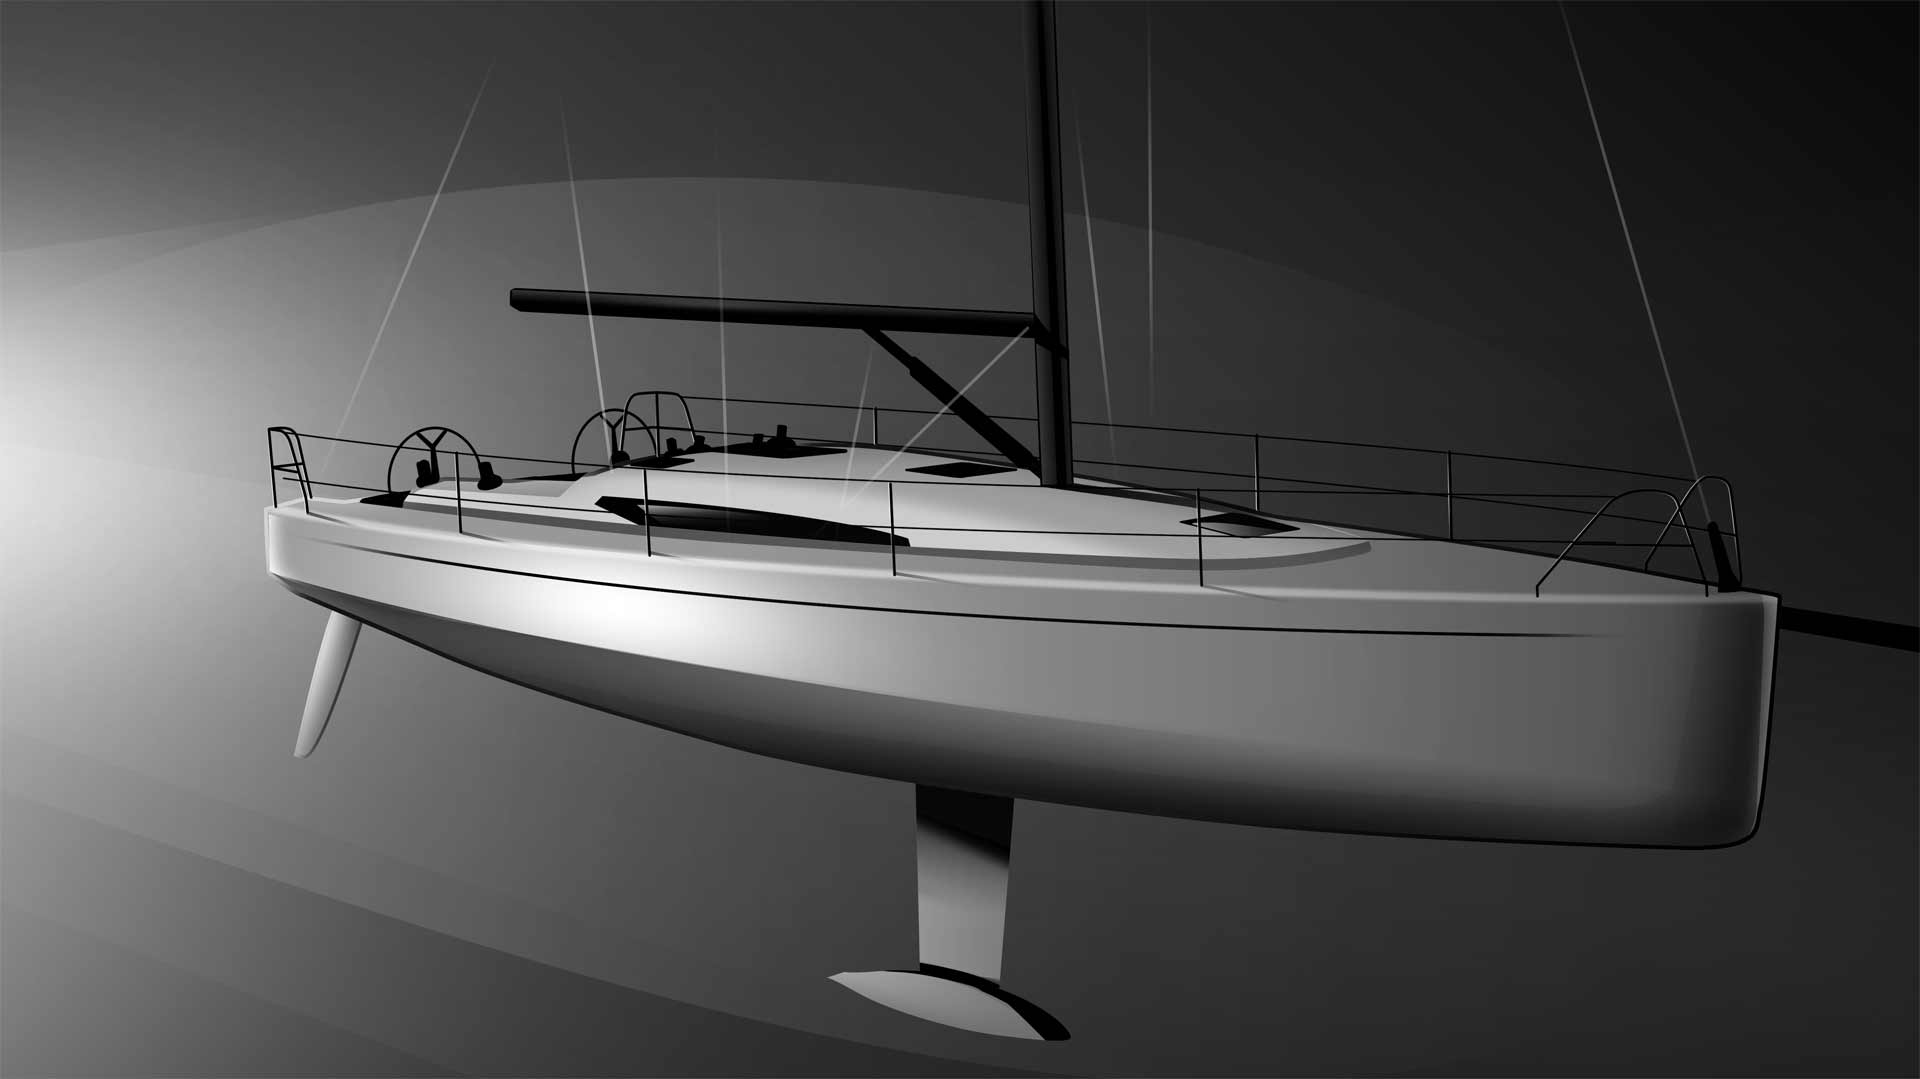 The yacht will be available as a racing version too